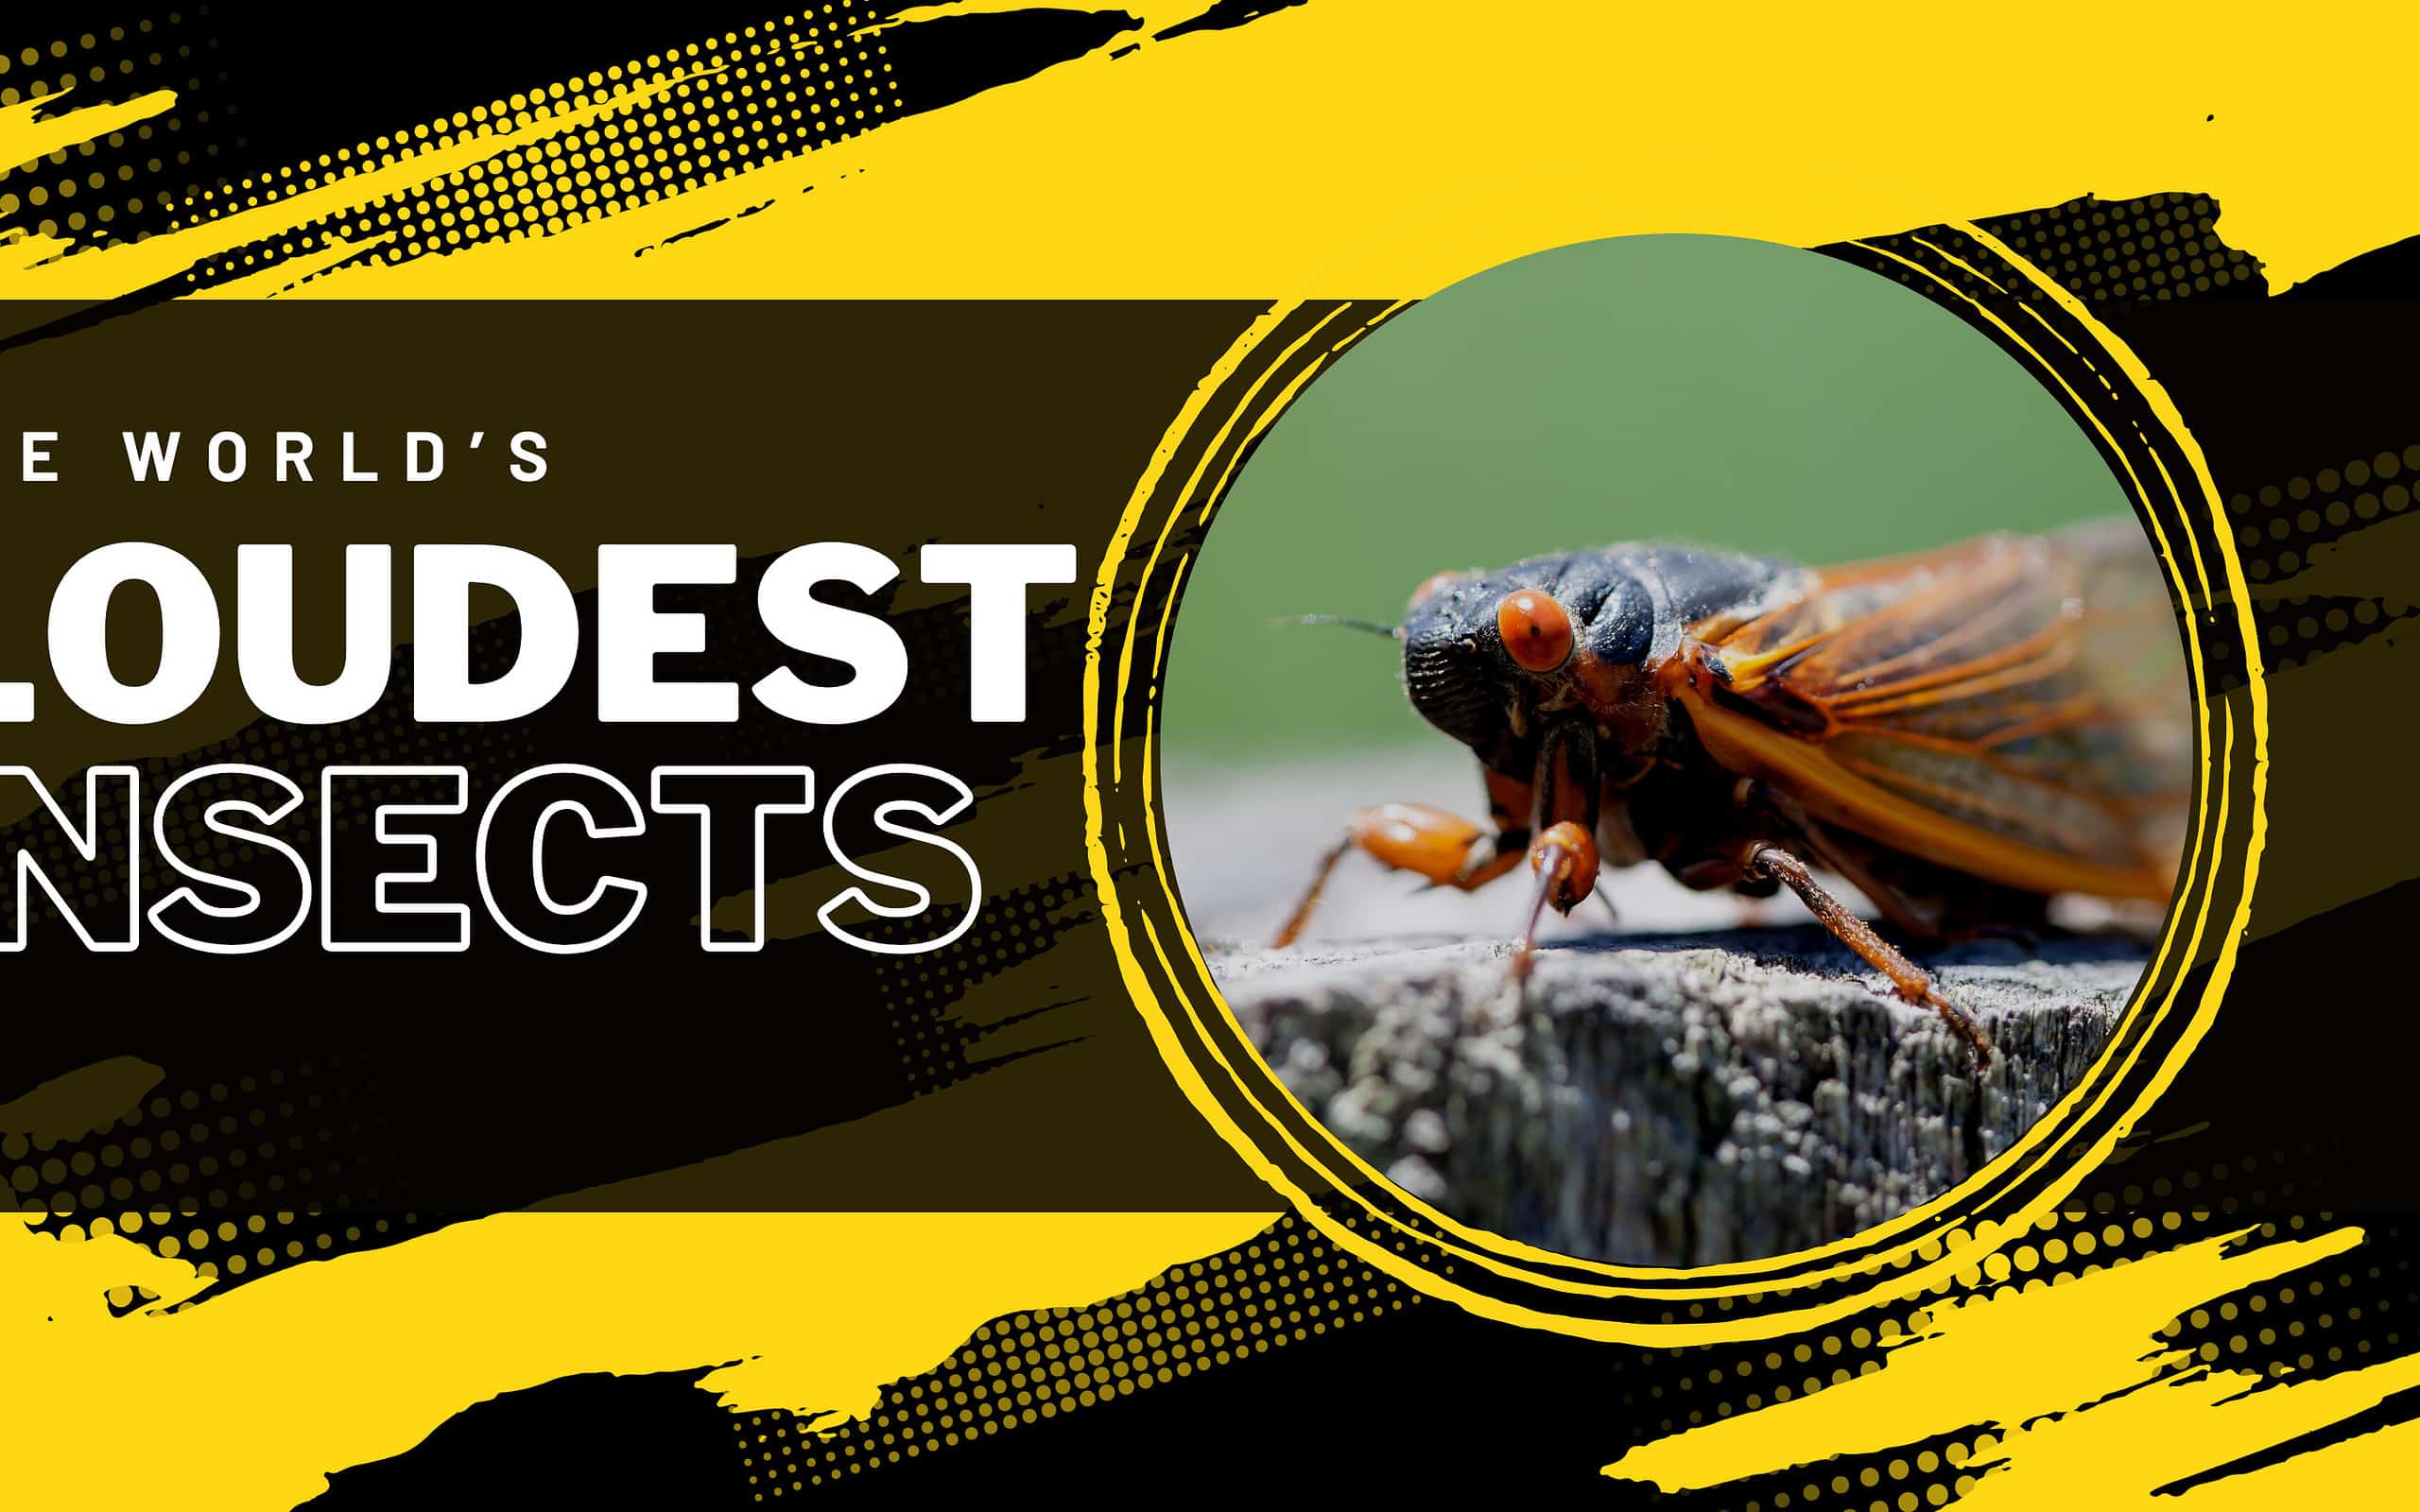 Loudest Insects